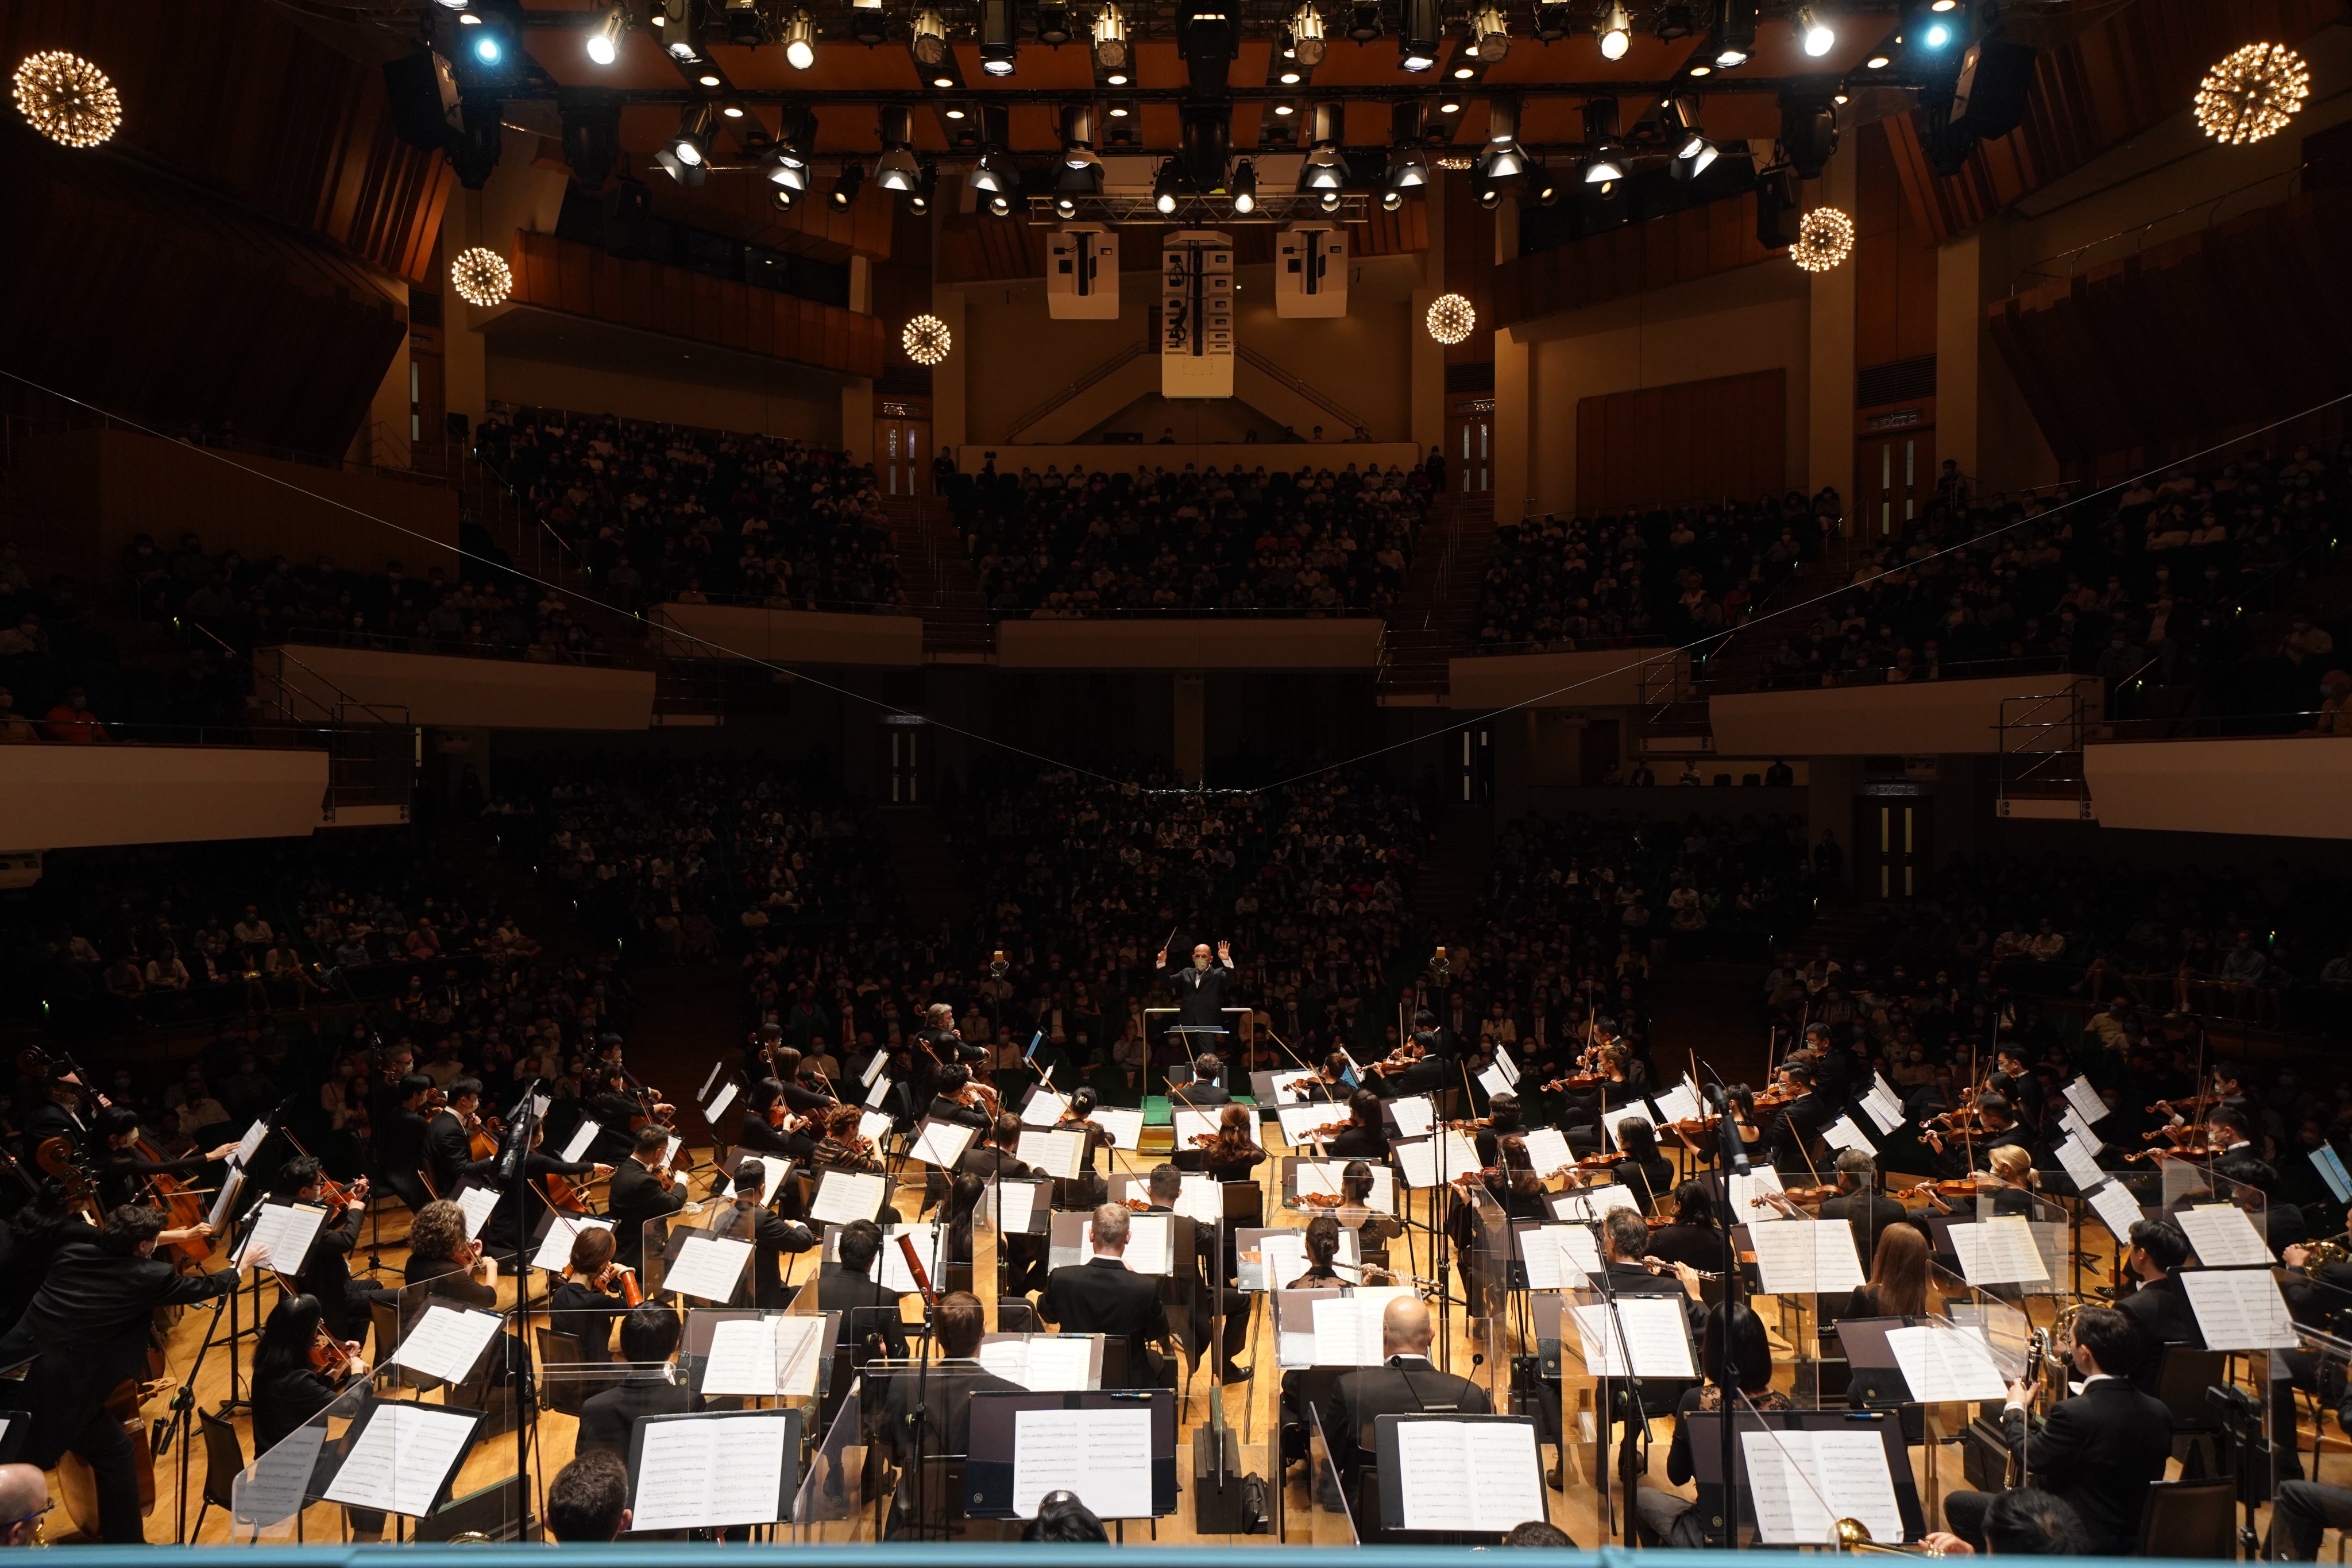 During the Covid-19 pandemic, the Hong Kong Philharmonic Orchestra has faced many challenges due to social-distancing and travel restrictions. Photo: Eric Hong / HK Phil